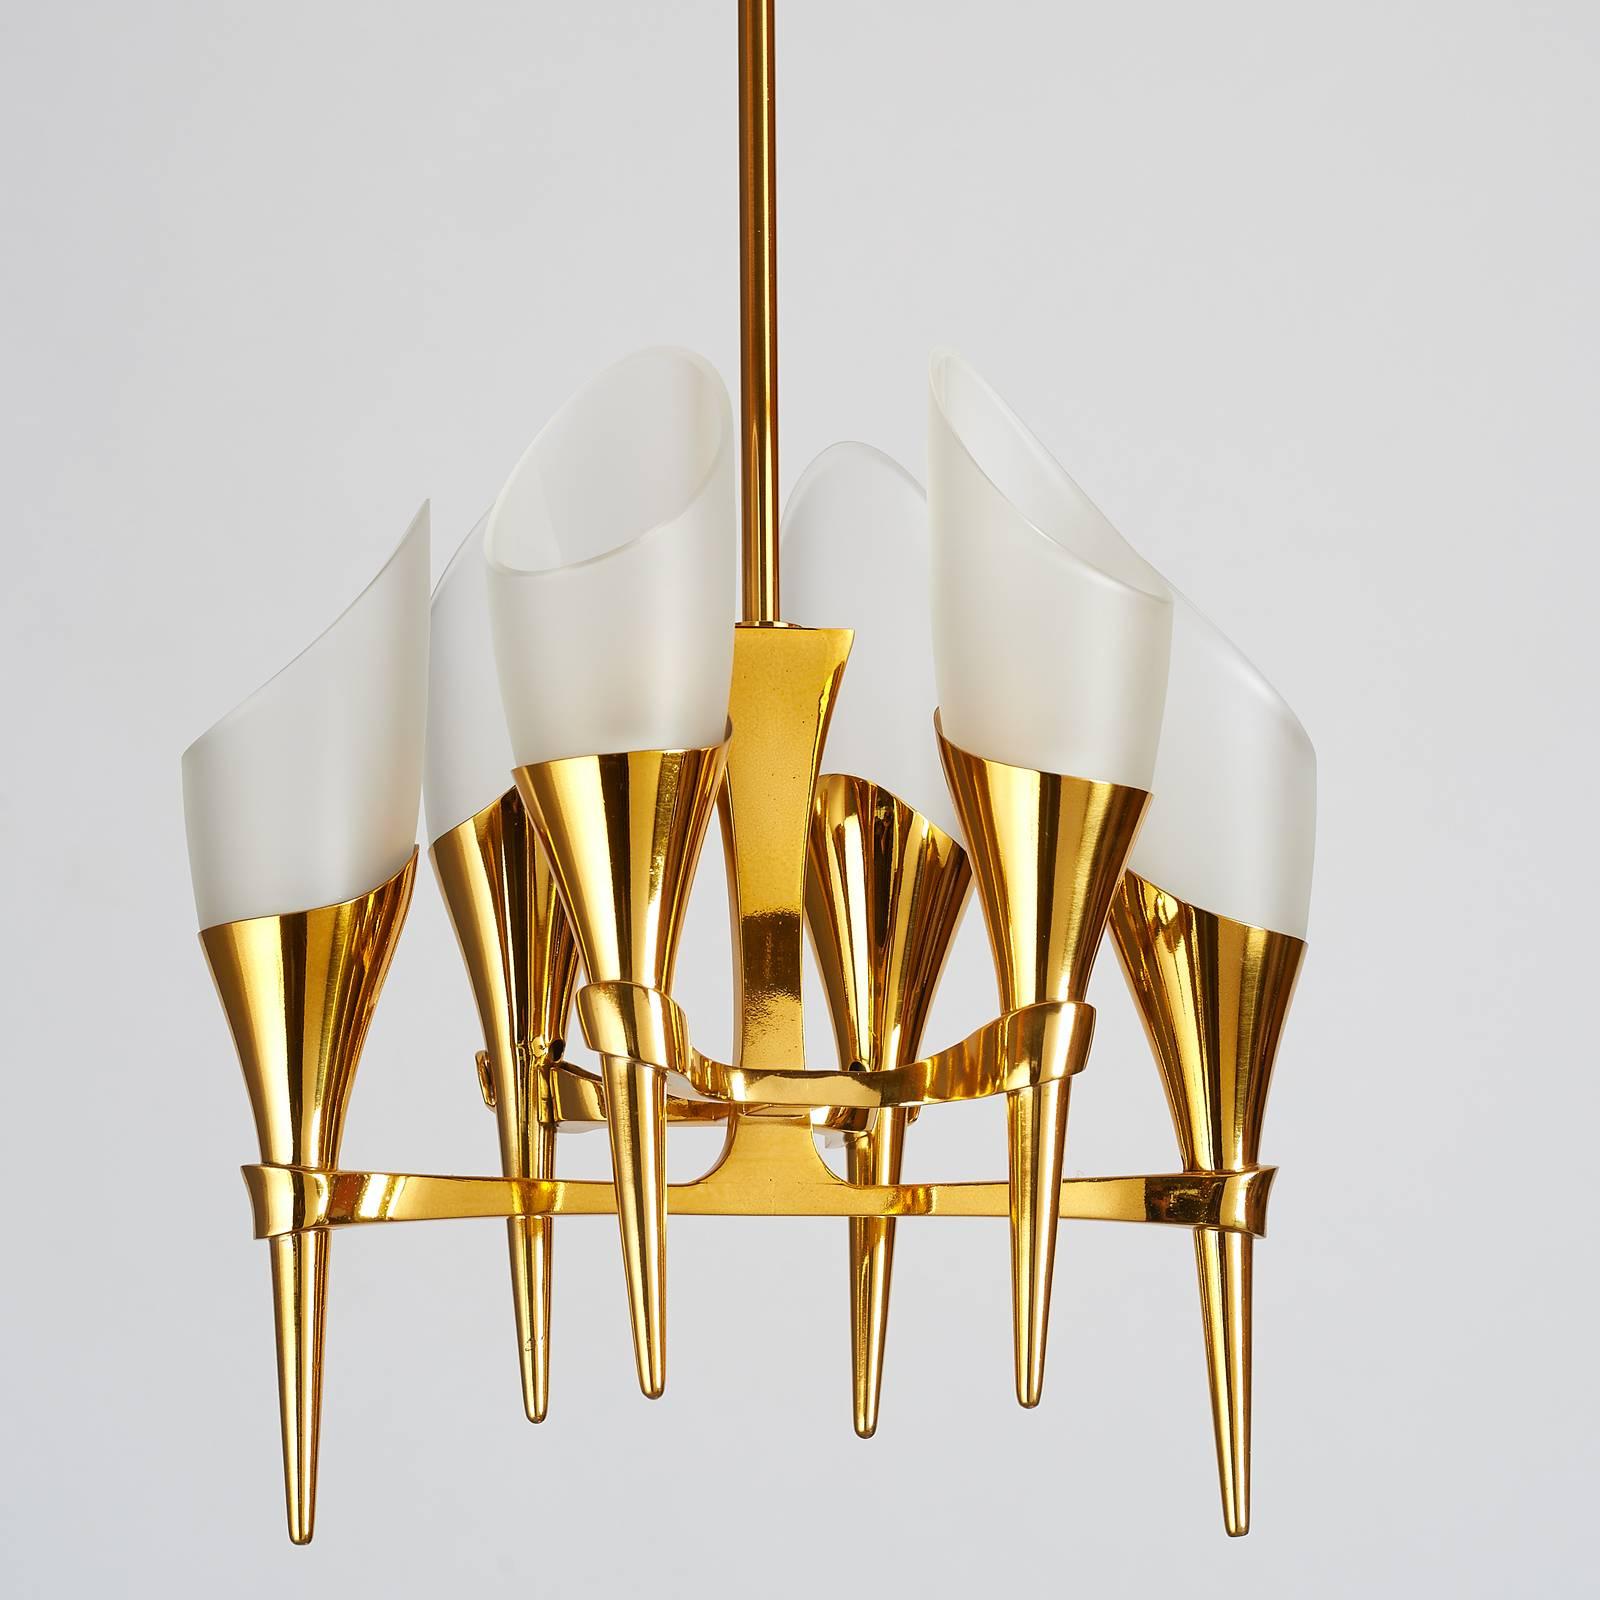 Max Ingrand ( 1908-1969 ) for Fontana Arte.
Exceptional six branch chandelier in polished bronze with sculpted arms
and frosted bias cut-glass shades,
Italy, circa 1960.
Dimensions: 14 x 10 x 36 H as shown, body 15 H.
Rewired for use in the U.S.A.